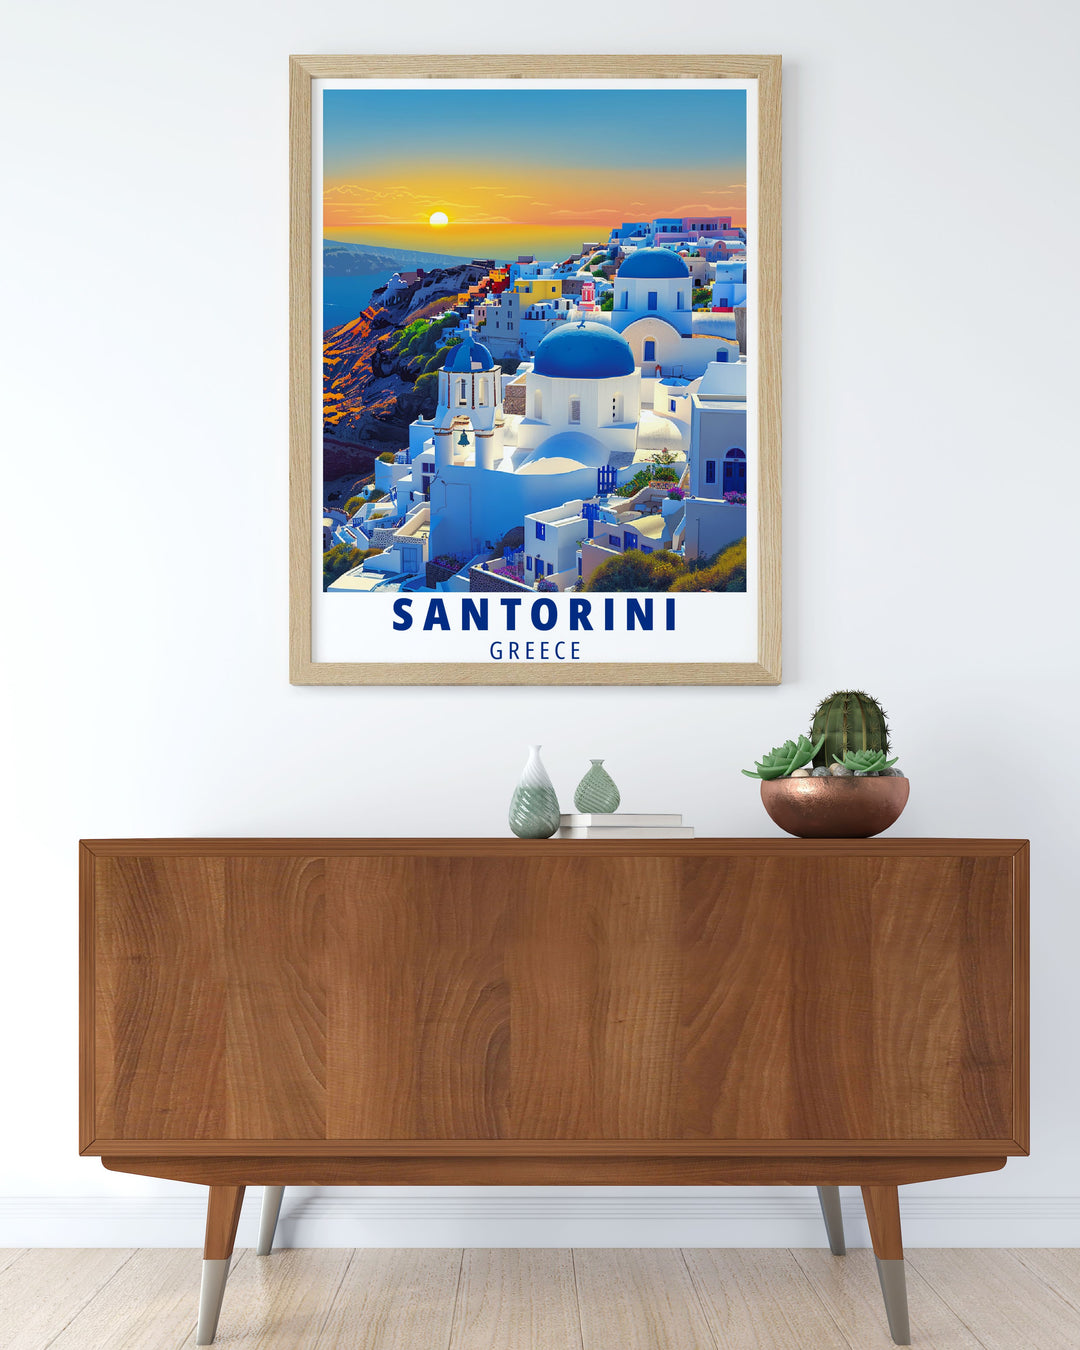 Detailed illustration of Oia, Santorini, highlighting its picturesque scenery and historic charm. Perfect for any Greece inspired art collection or home decor.